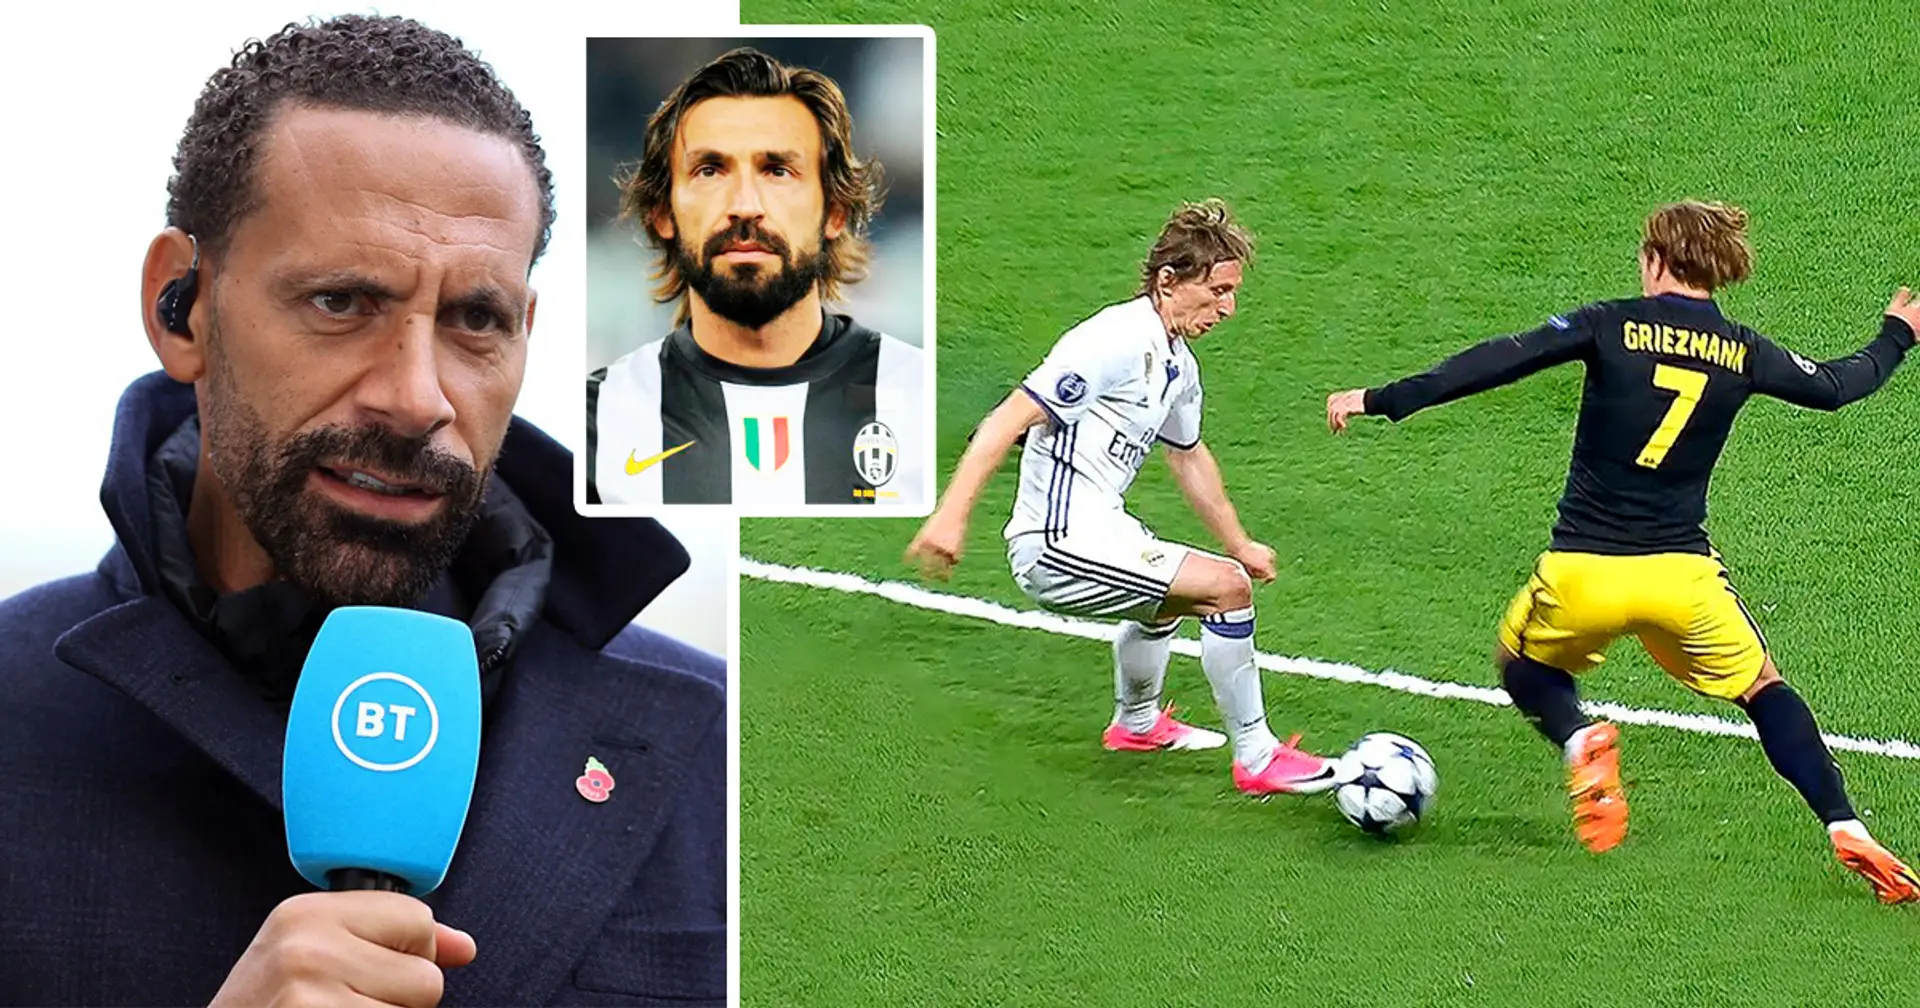 'Pirlo or Modric? Modric': Ferdiand's response when asked to choose between Luka Modric and Andrea Pirlo